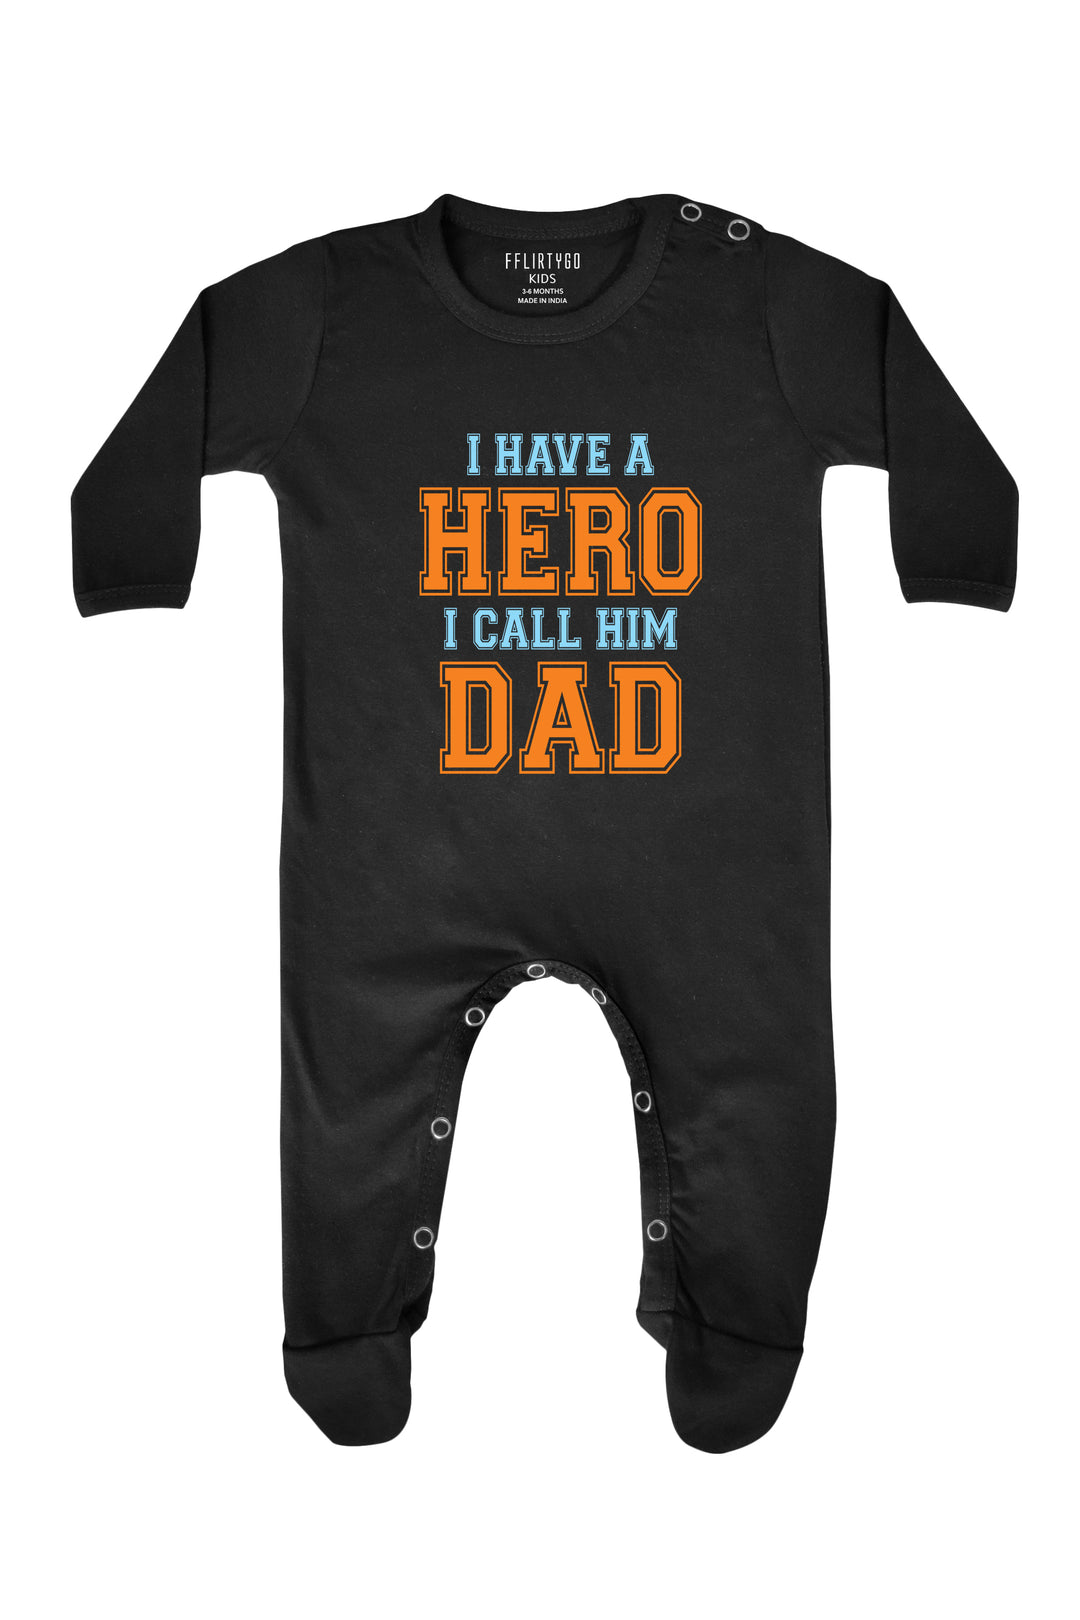 I Have A Hero I Call Him Dad  Baby Romper | Onesies